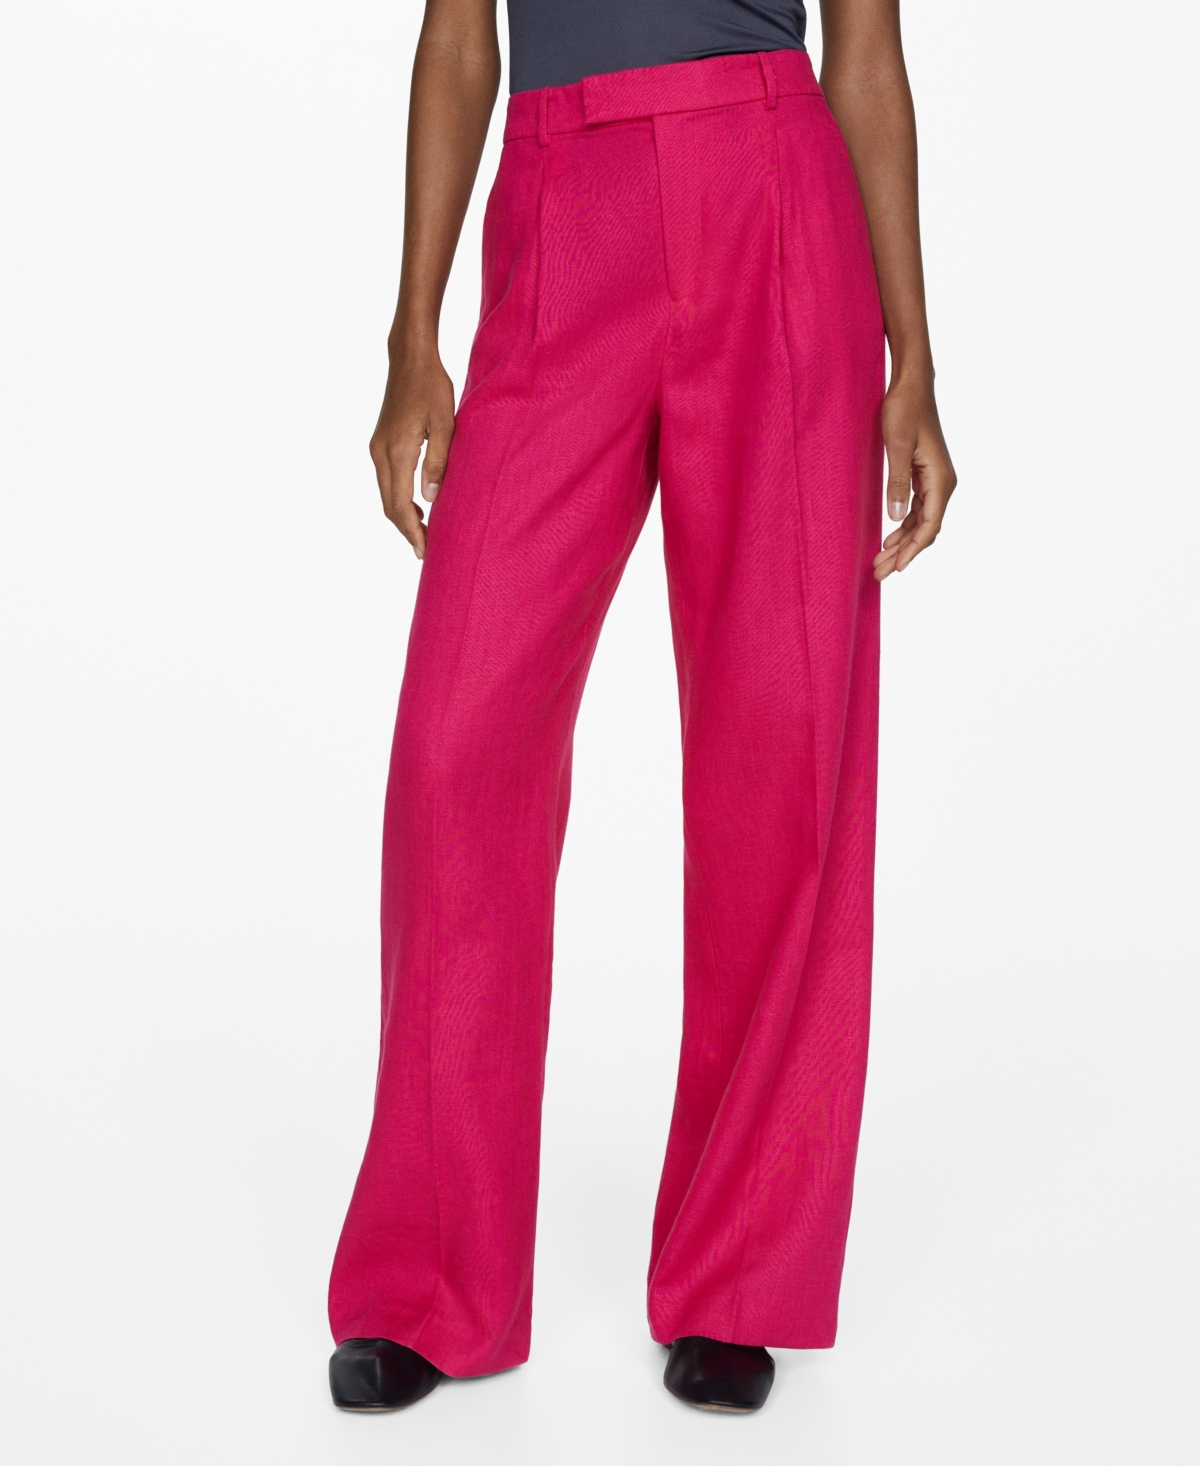 Women's Pleated Linen Pants - Bright Pink